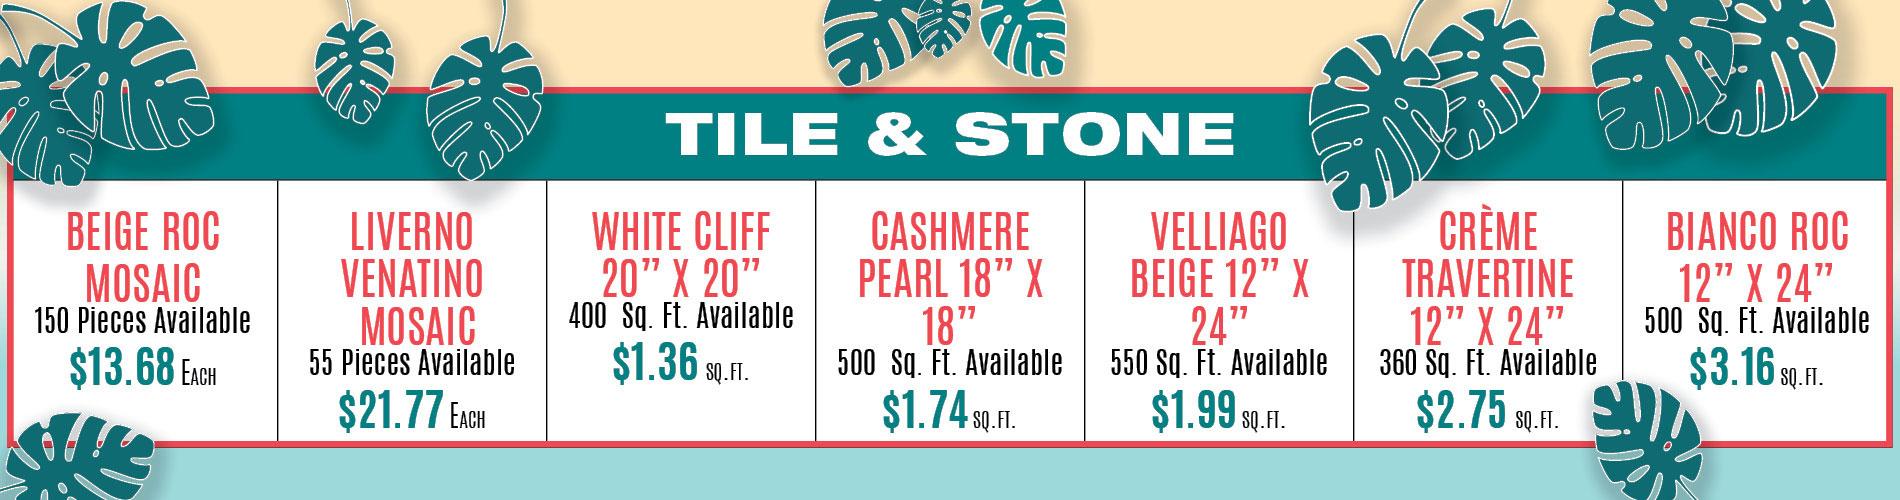 Tile and Stone sale